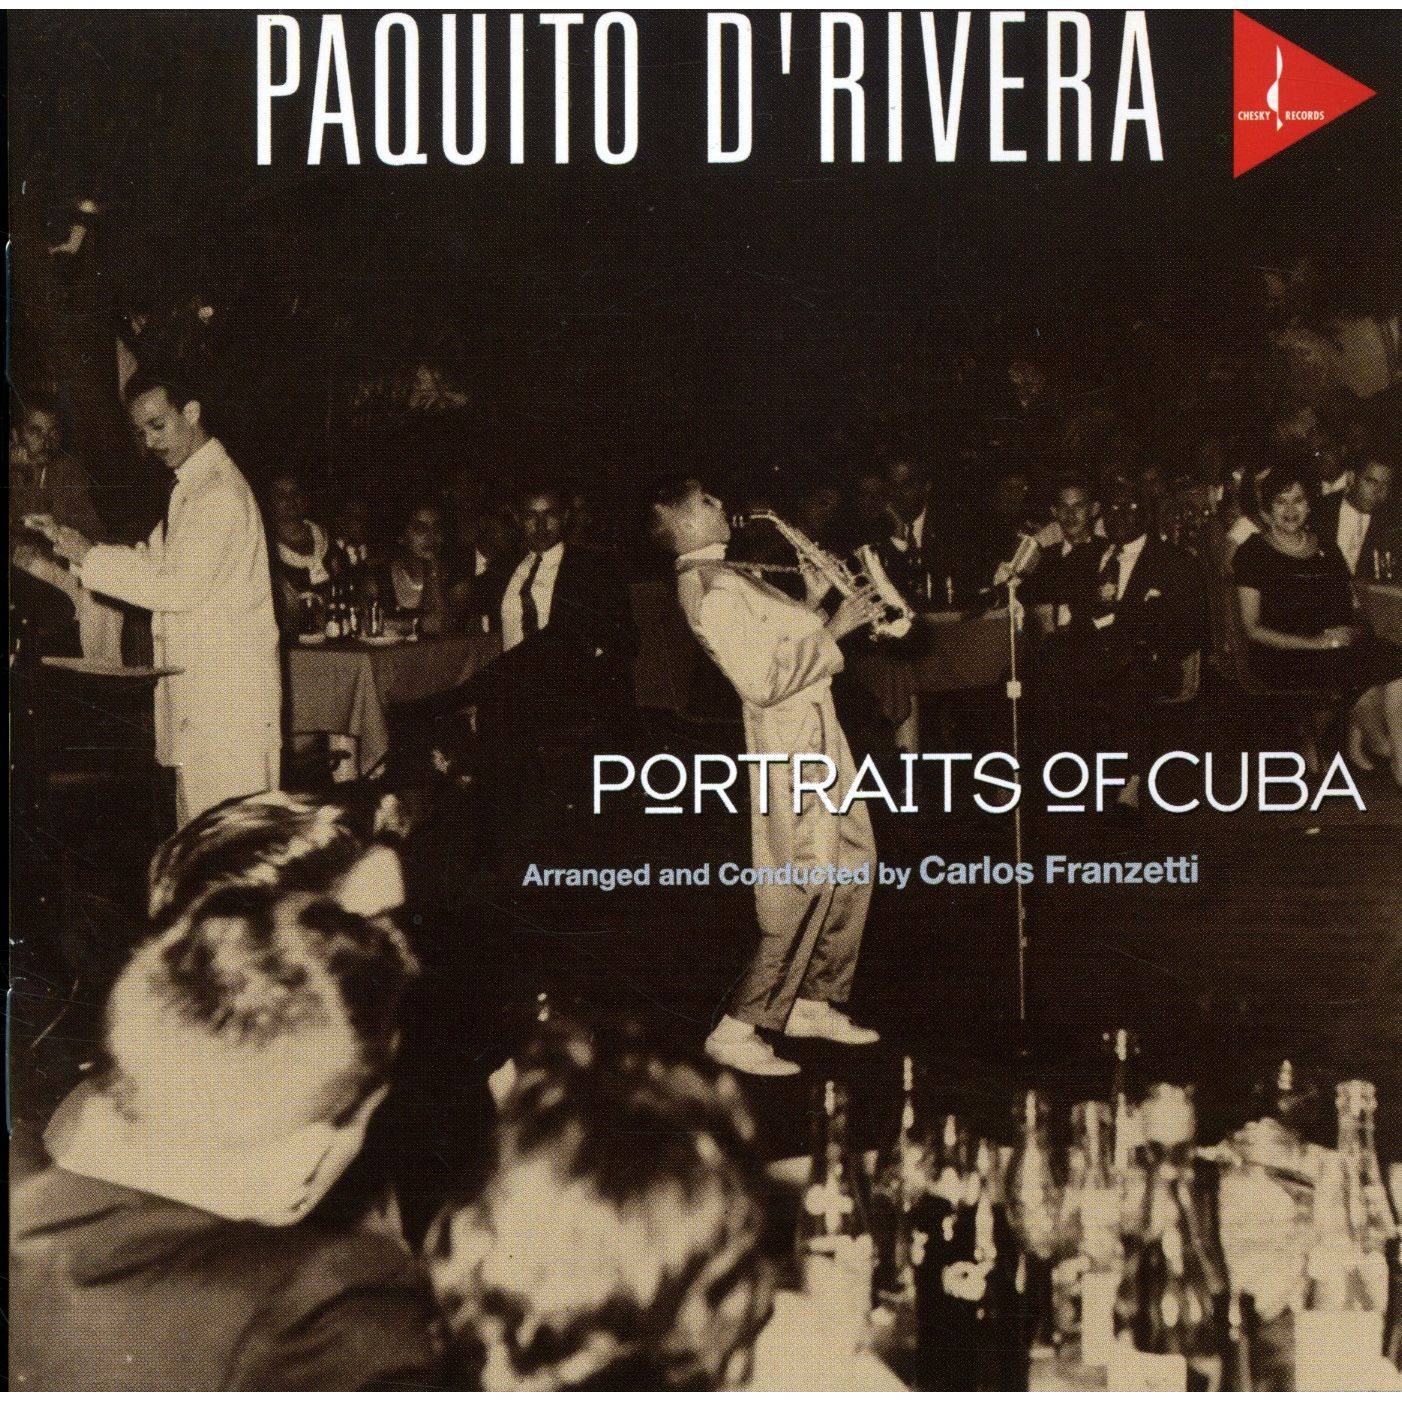 Paquito D’Rivera – Portraits Of Cuba (1996) [Reissue 2005] MCH SACD ISO + DSF DSD64 + Hi-Res FLAC